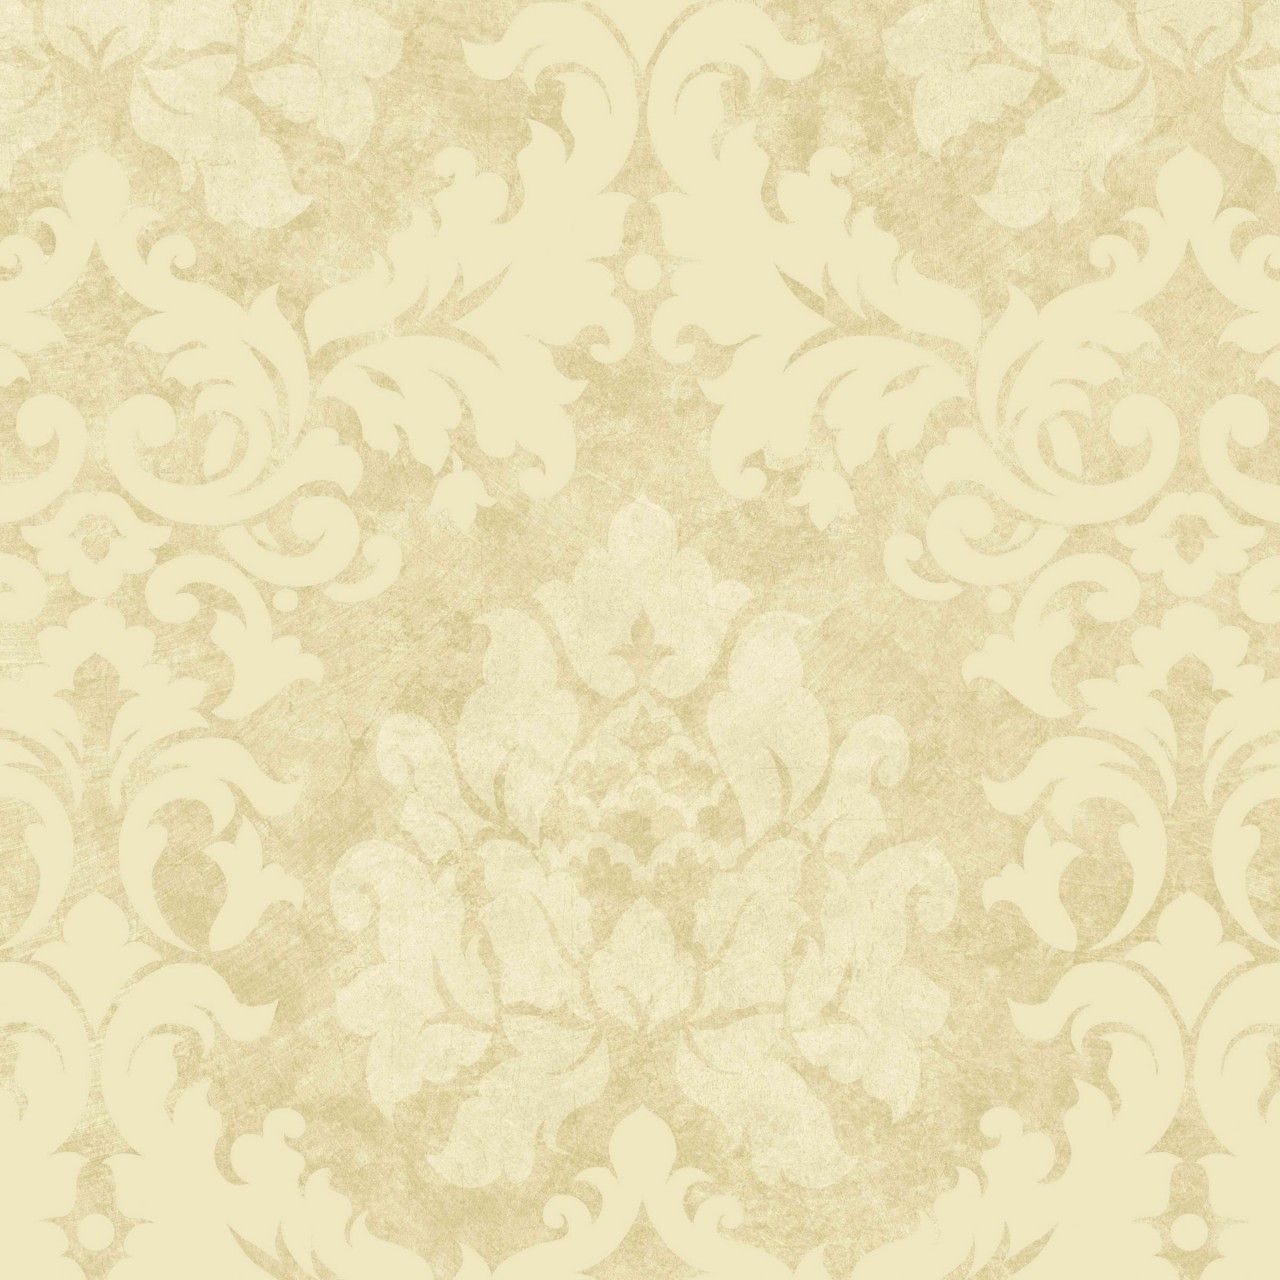 Buy Traditional Wallpaper Online, Traditional Wallpaper Ideas and other